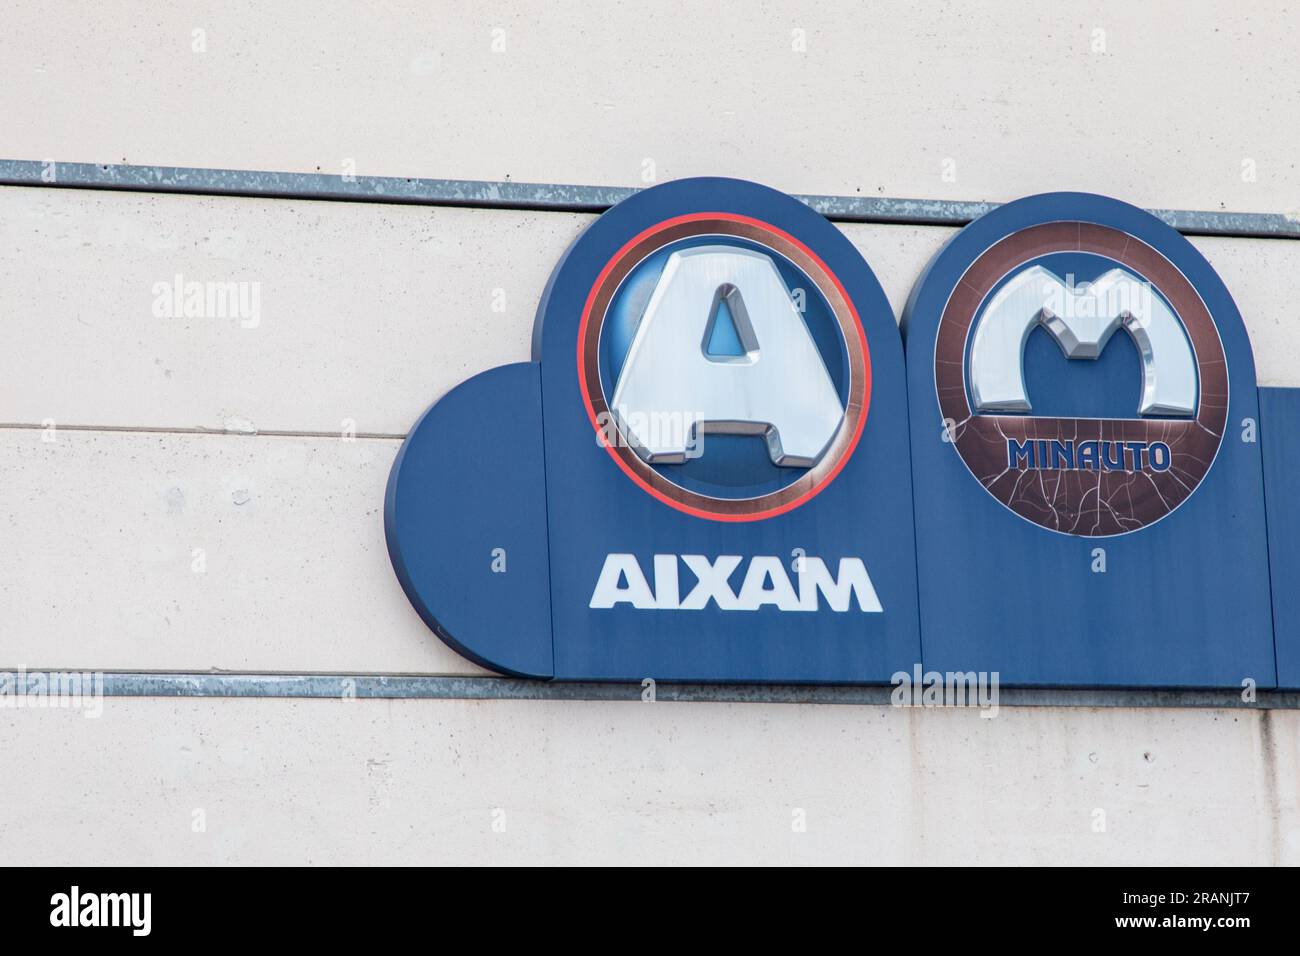 Bordeaux , France - 07 01 2023 : Aixam minauto dealership shop logo brand and text sign wall part of microcar car Mega of French automobile manufactur Stock Photo